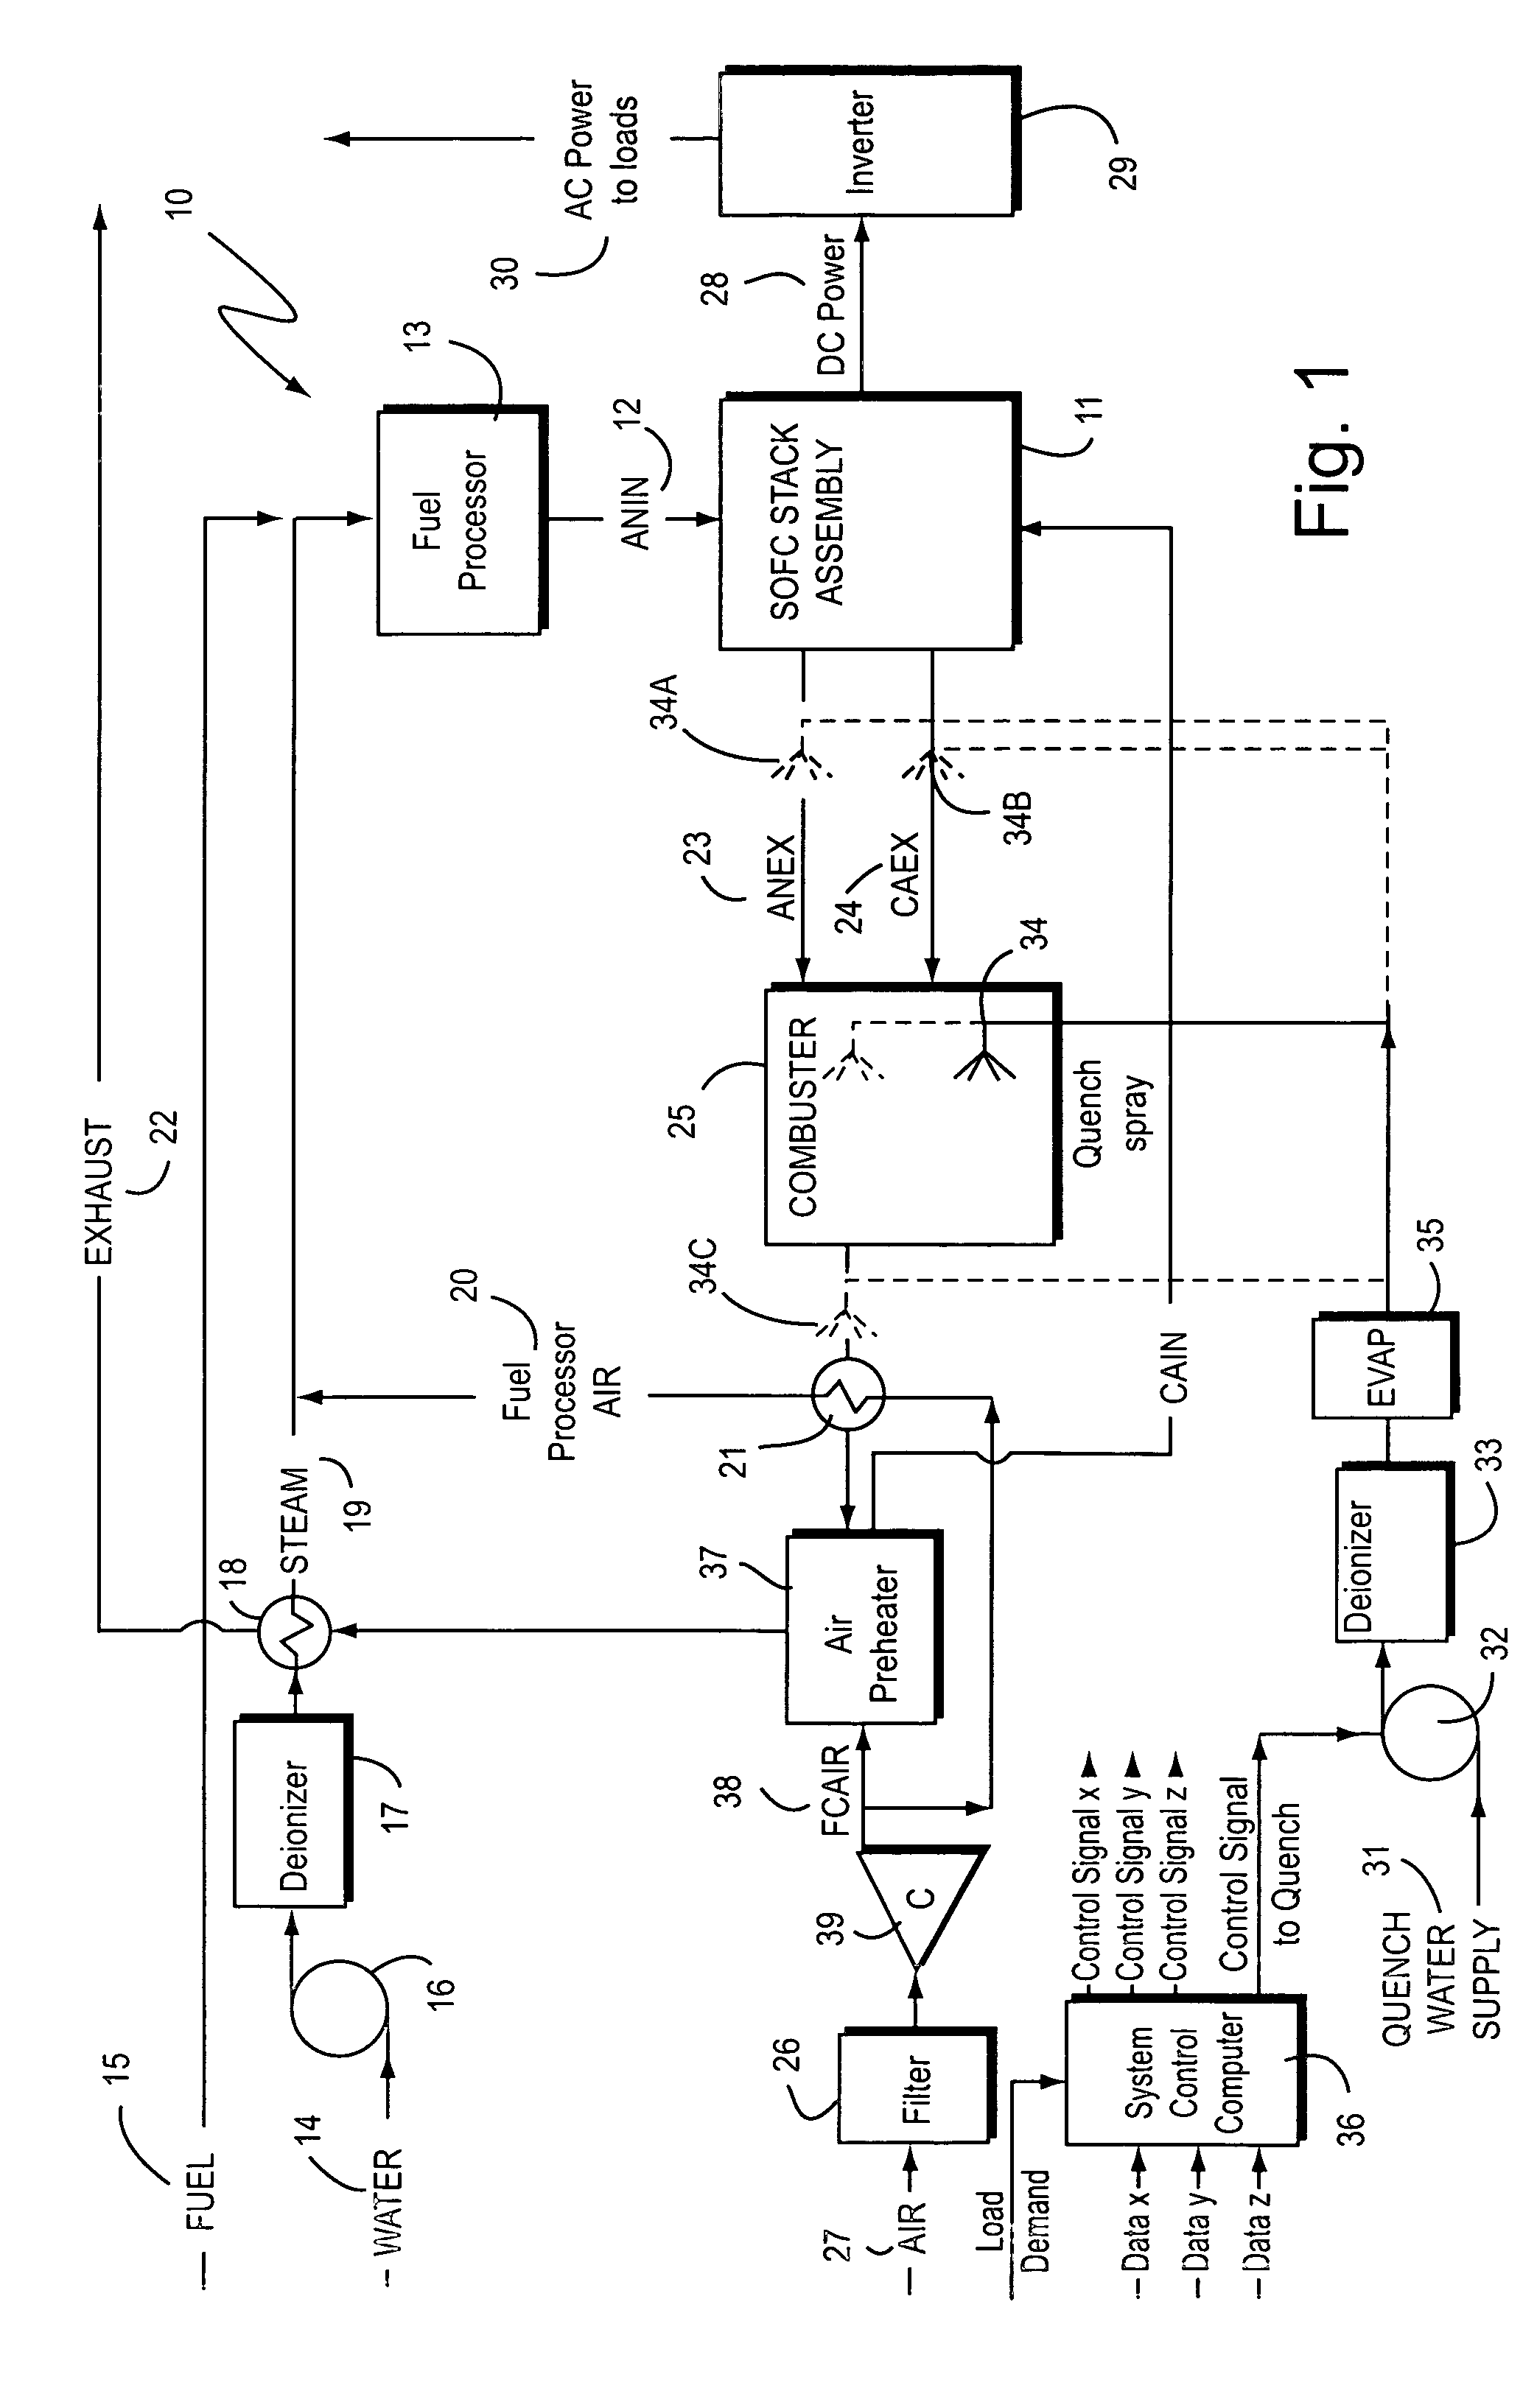 High temperature protection of fuel cell system combustor and other components via water or water or water vapor injection